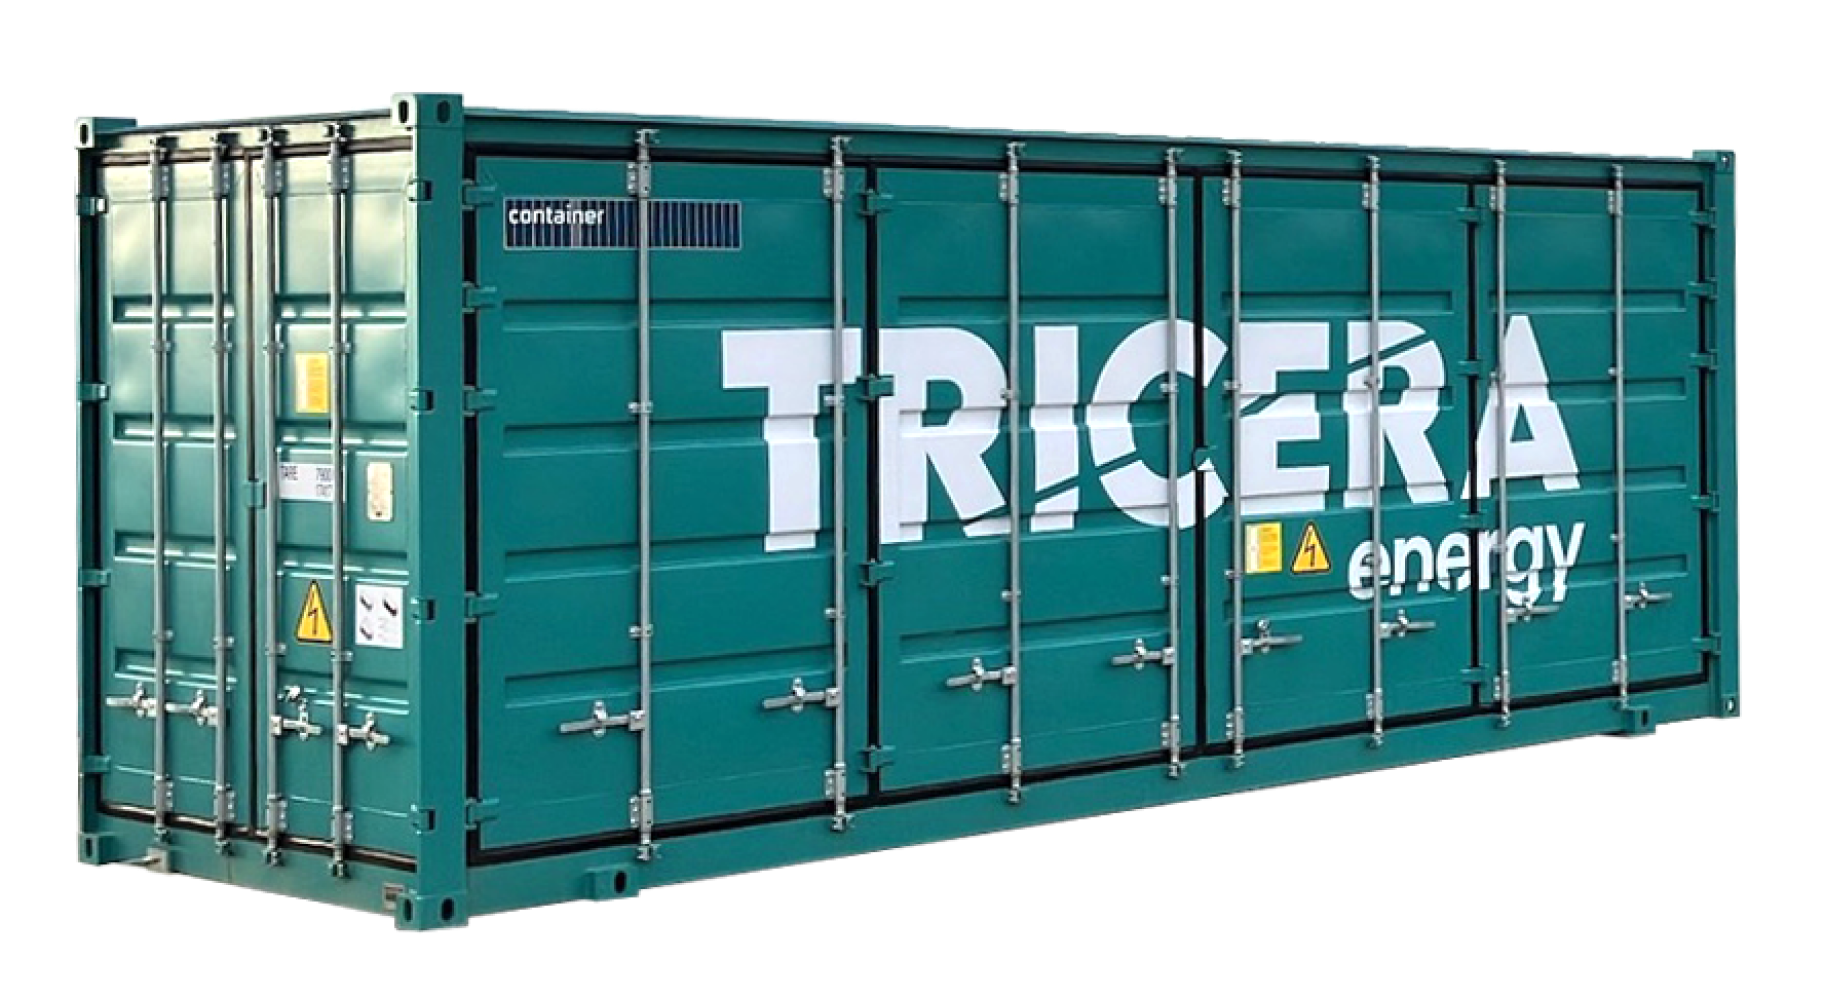 The picture shows a green container with the inscription "TRICERA energy".